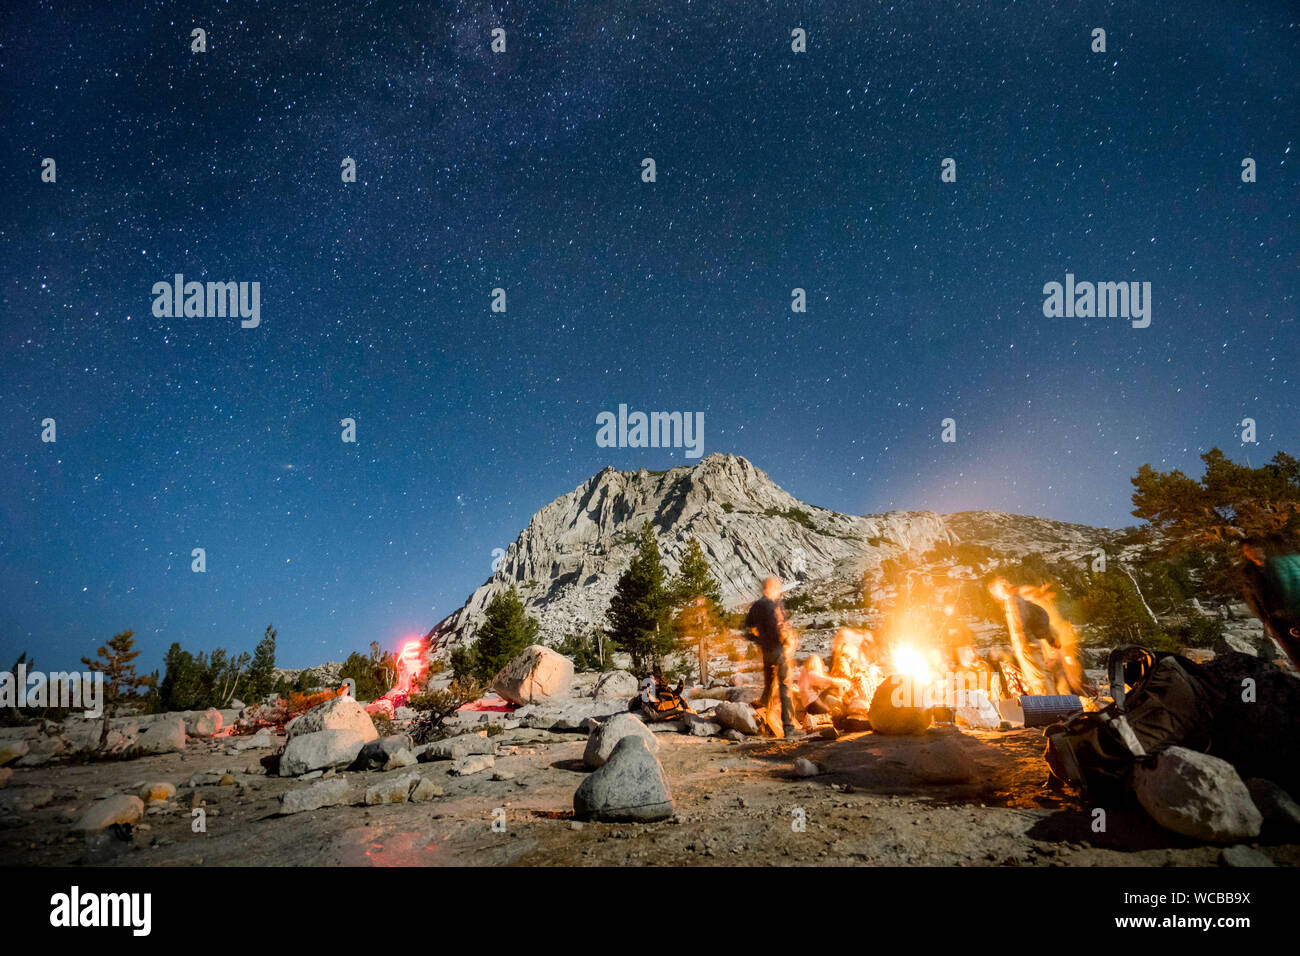 People Camping On Field Against Star Field Stock Photo